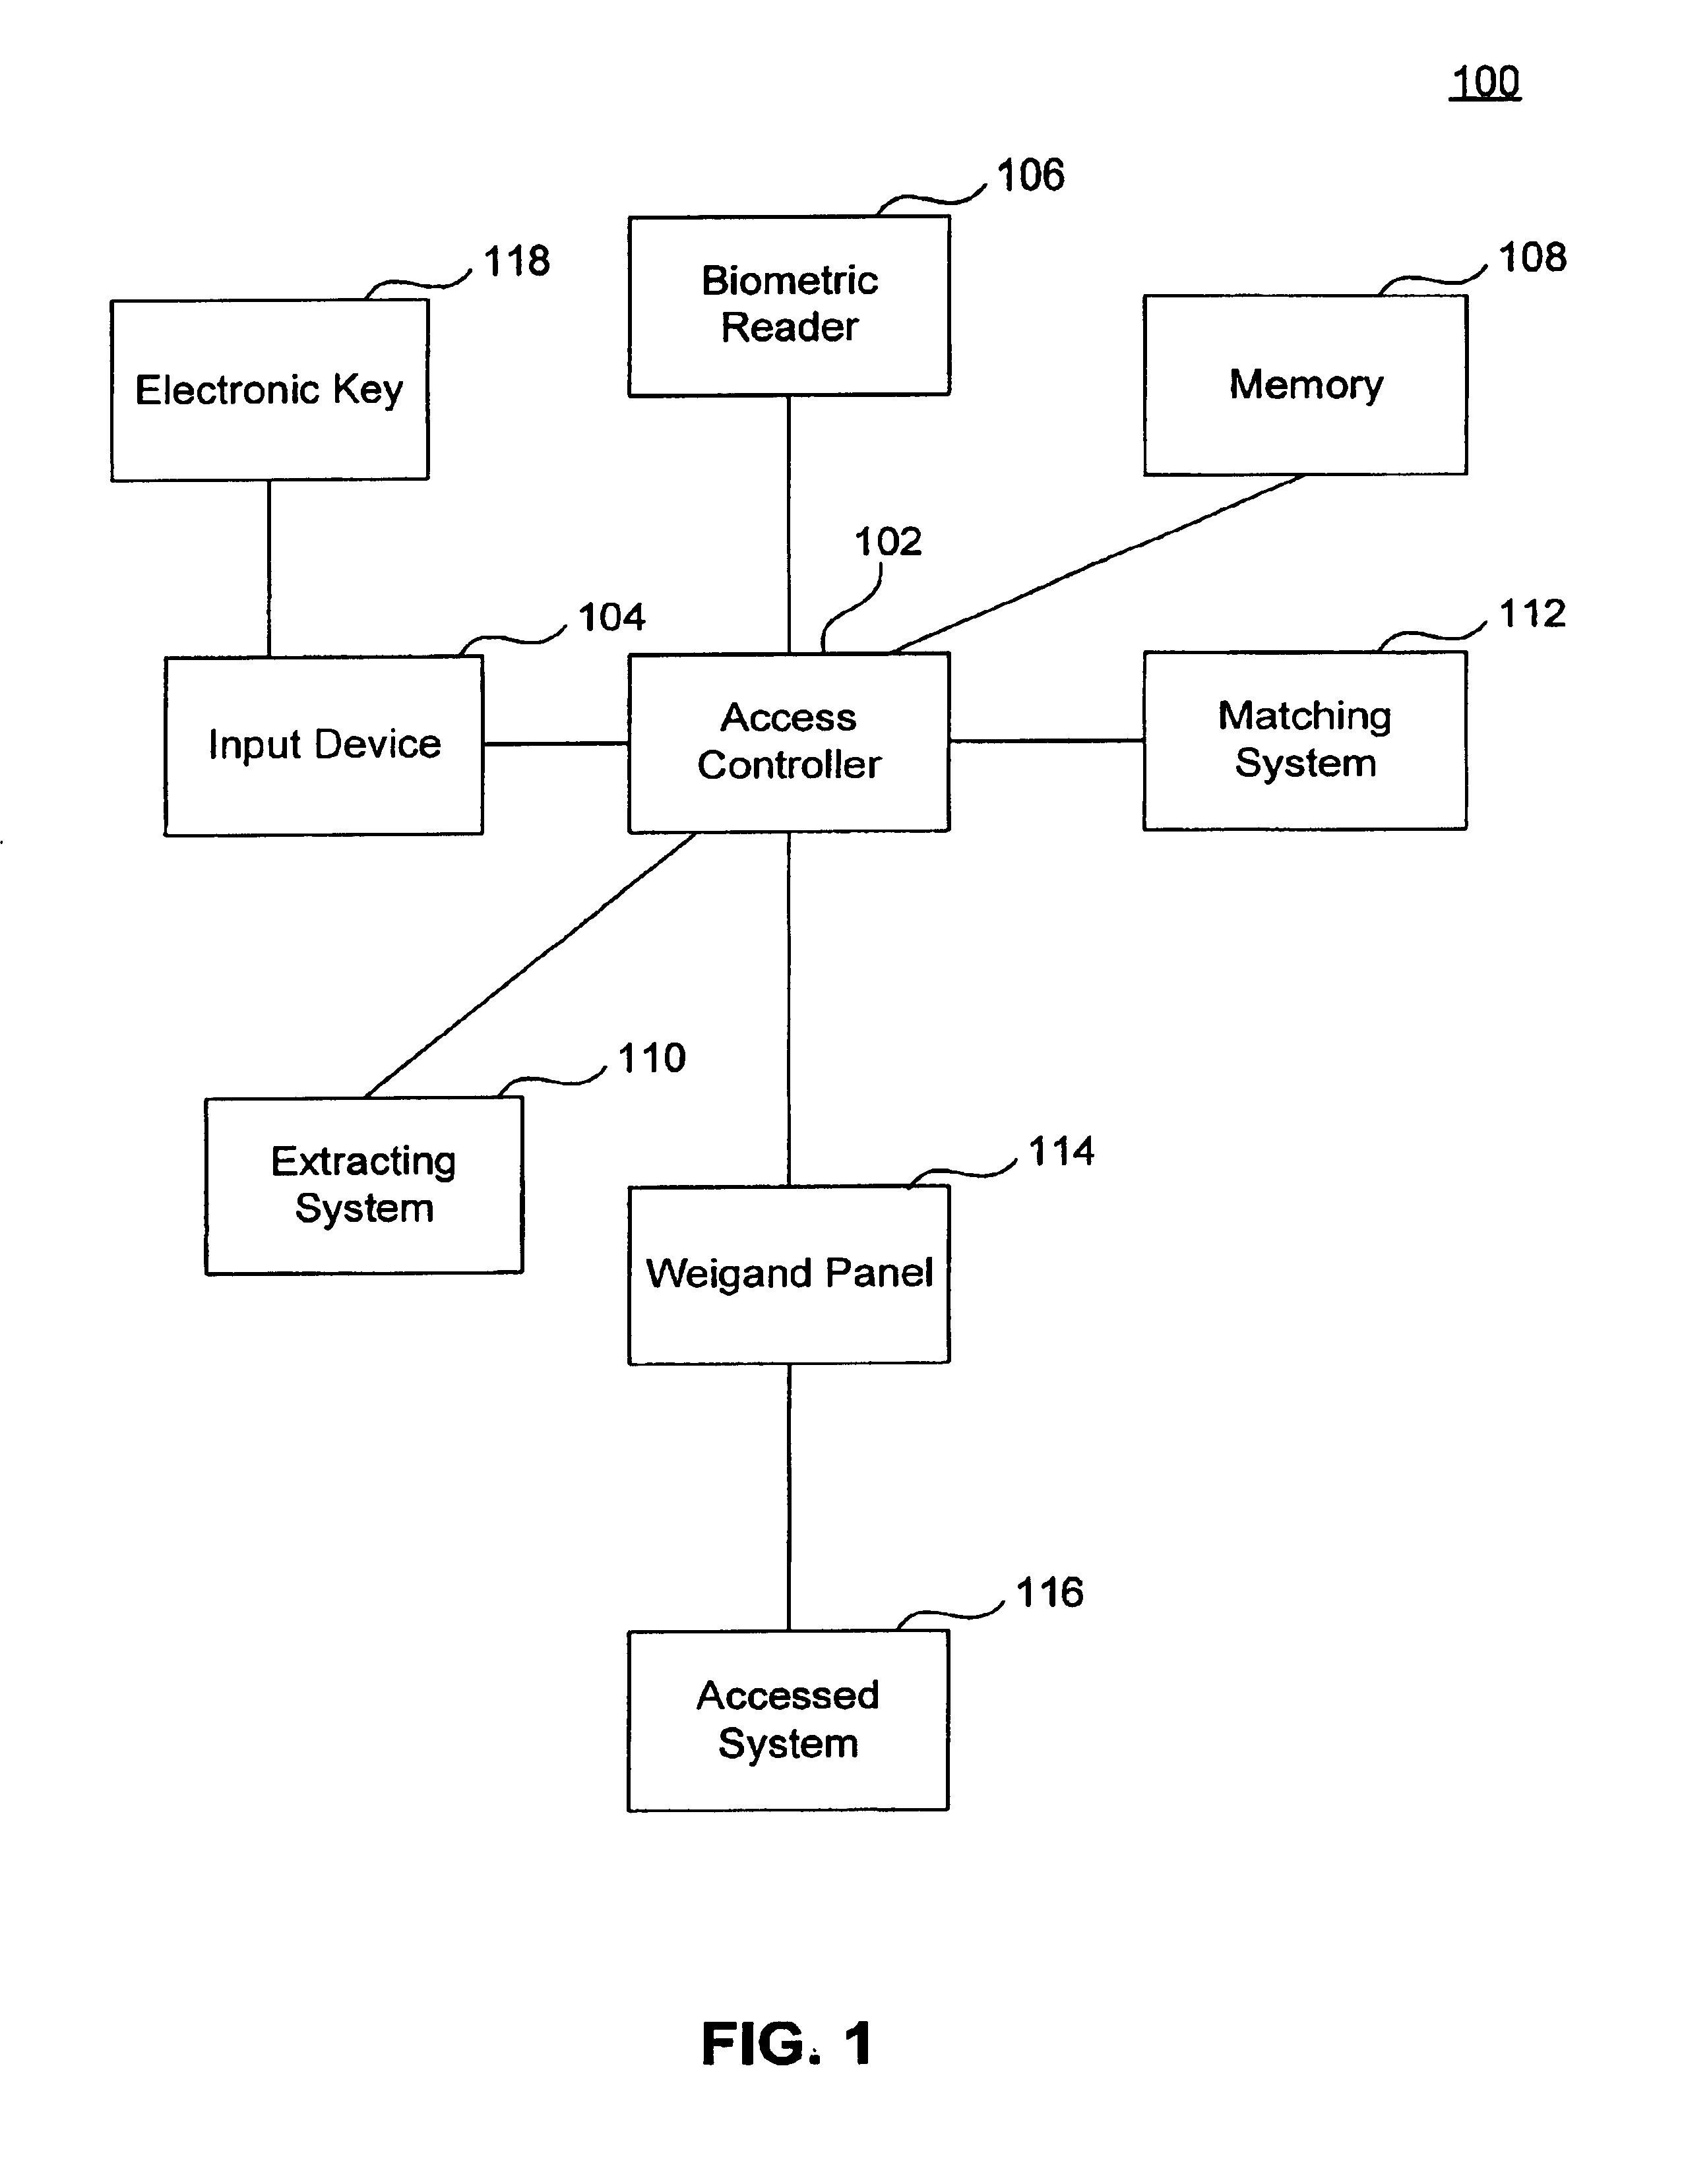 System and methods for access control utilizing two factors to control access